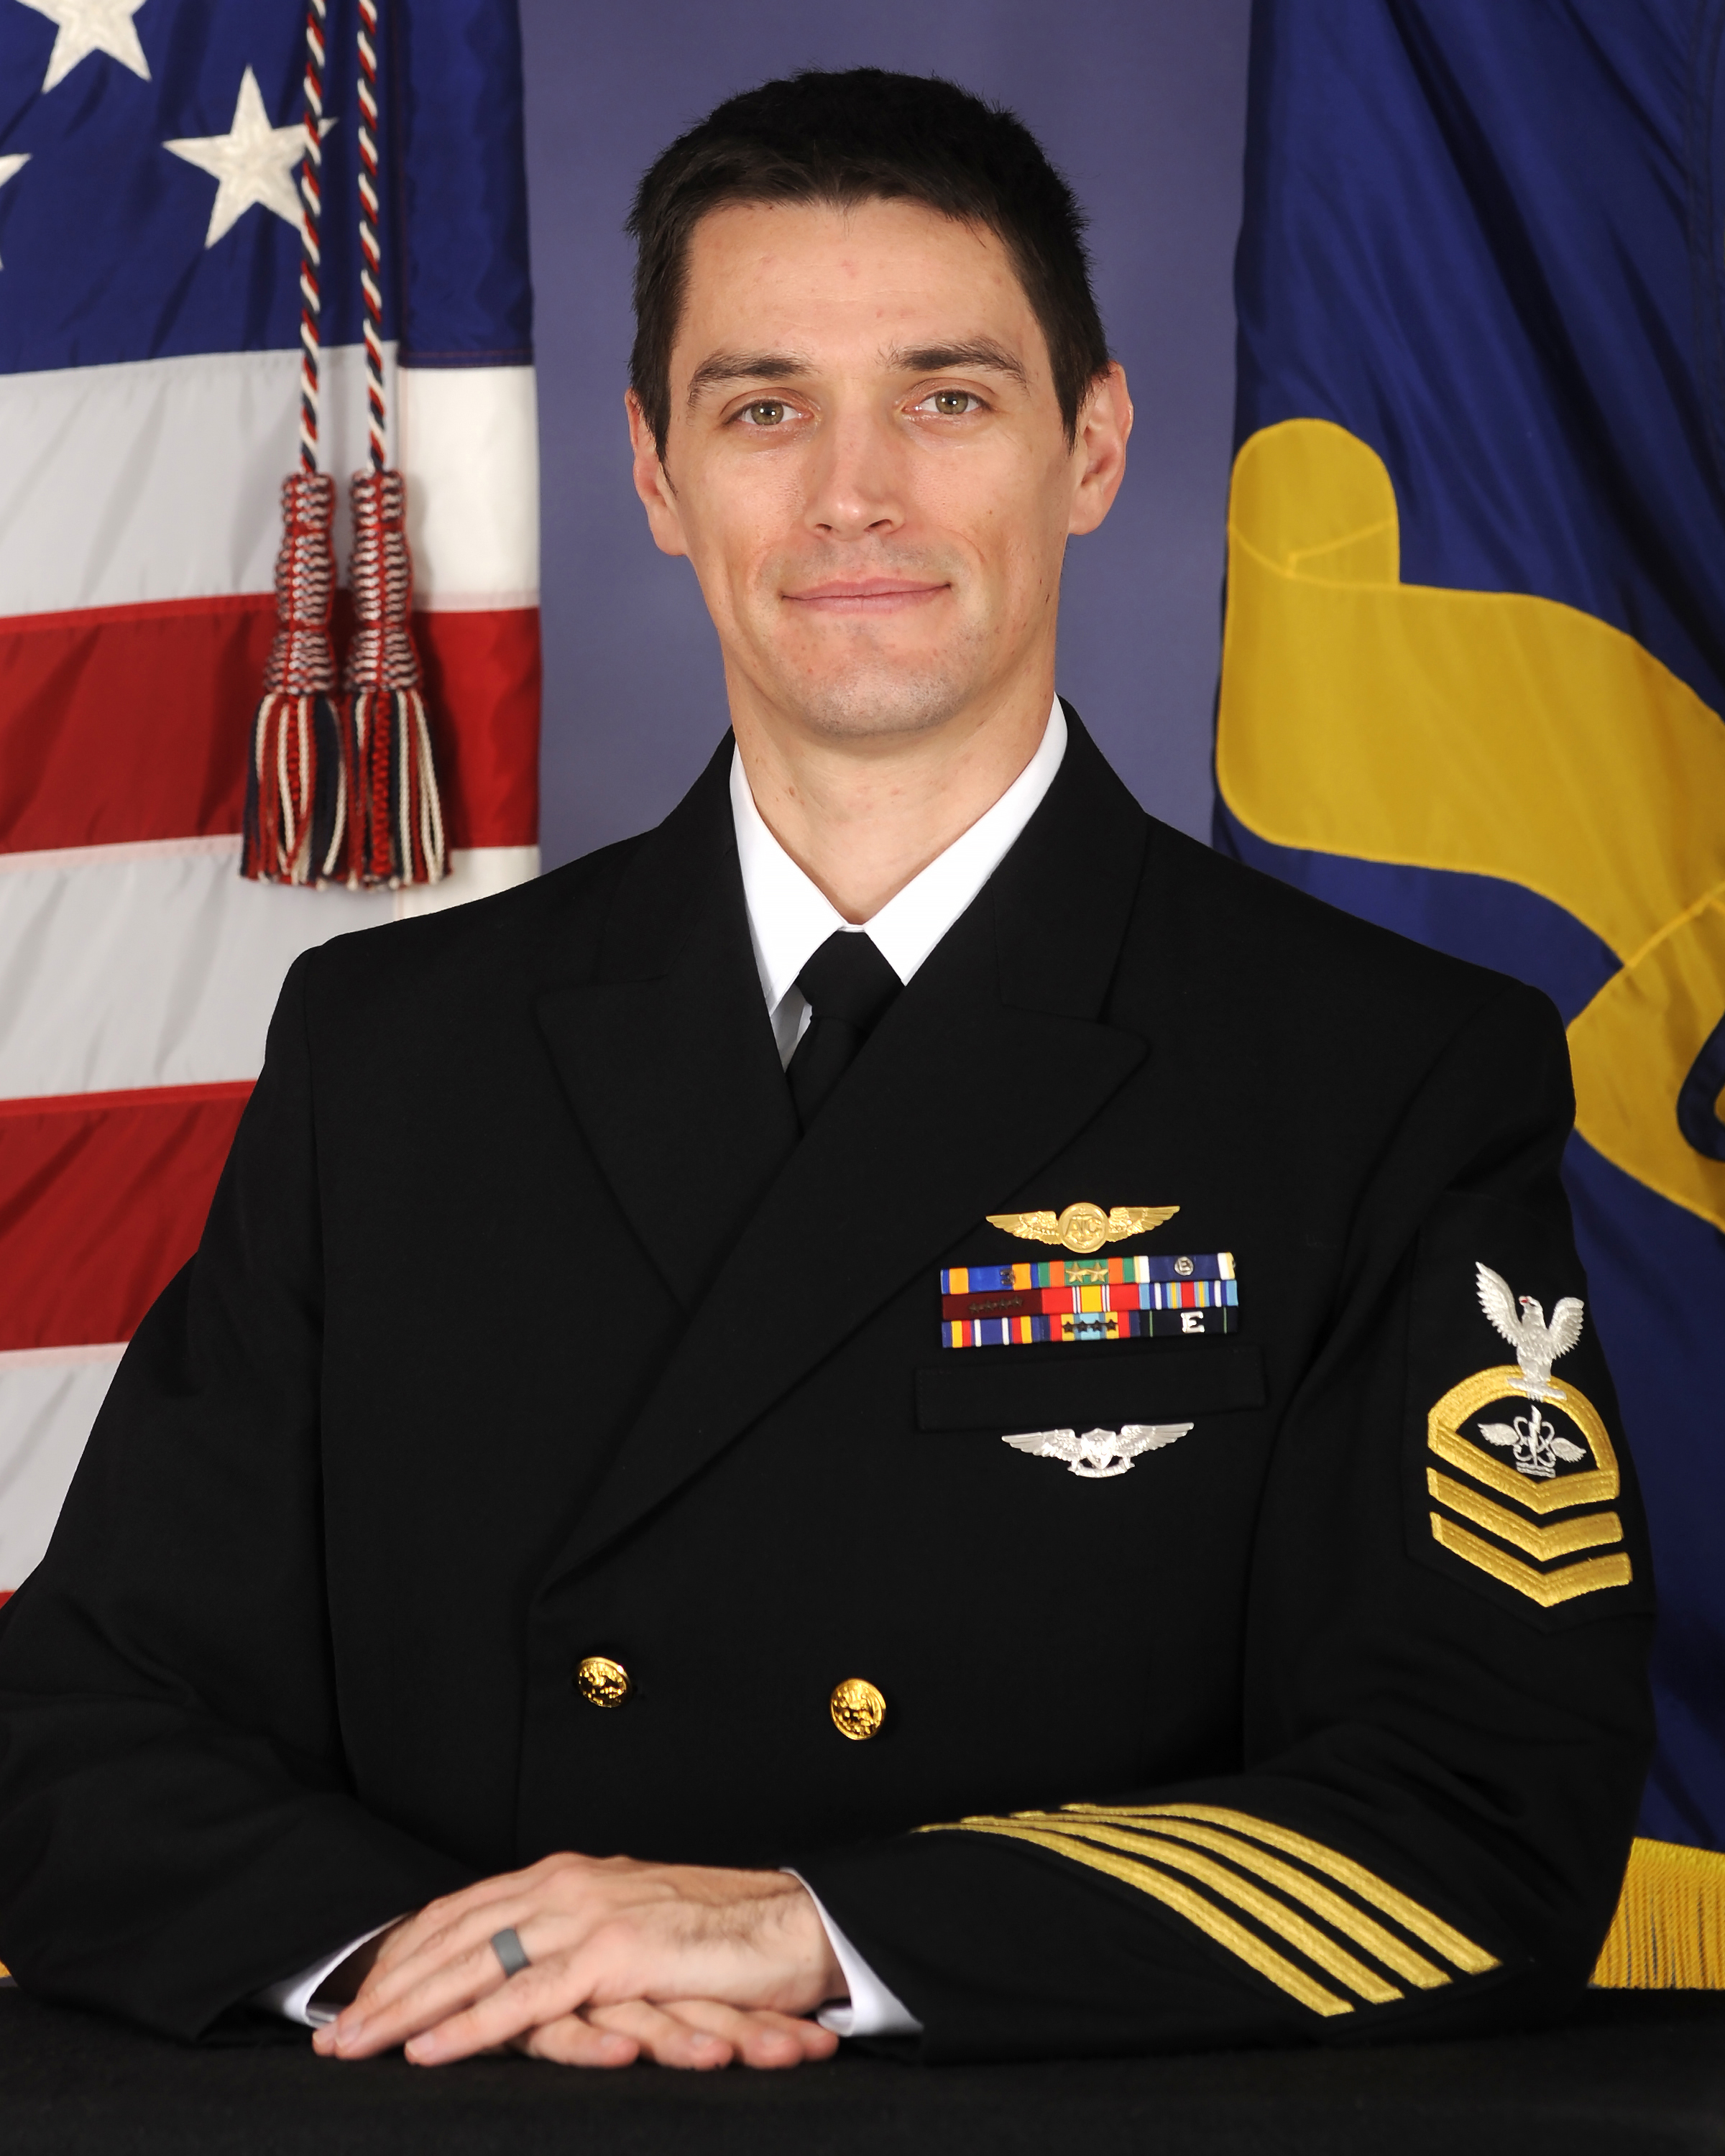 Chief Petty Officer Frederick C. Lewis